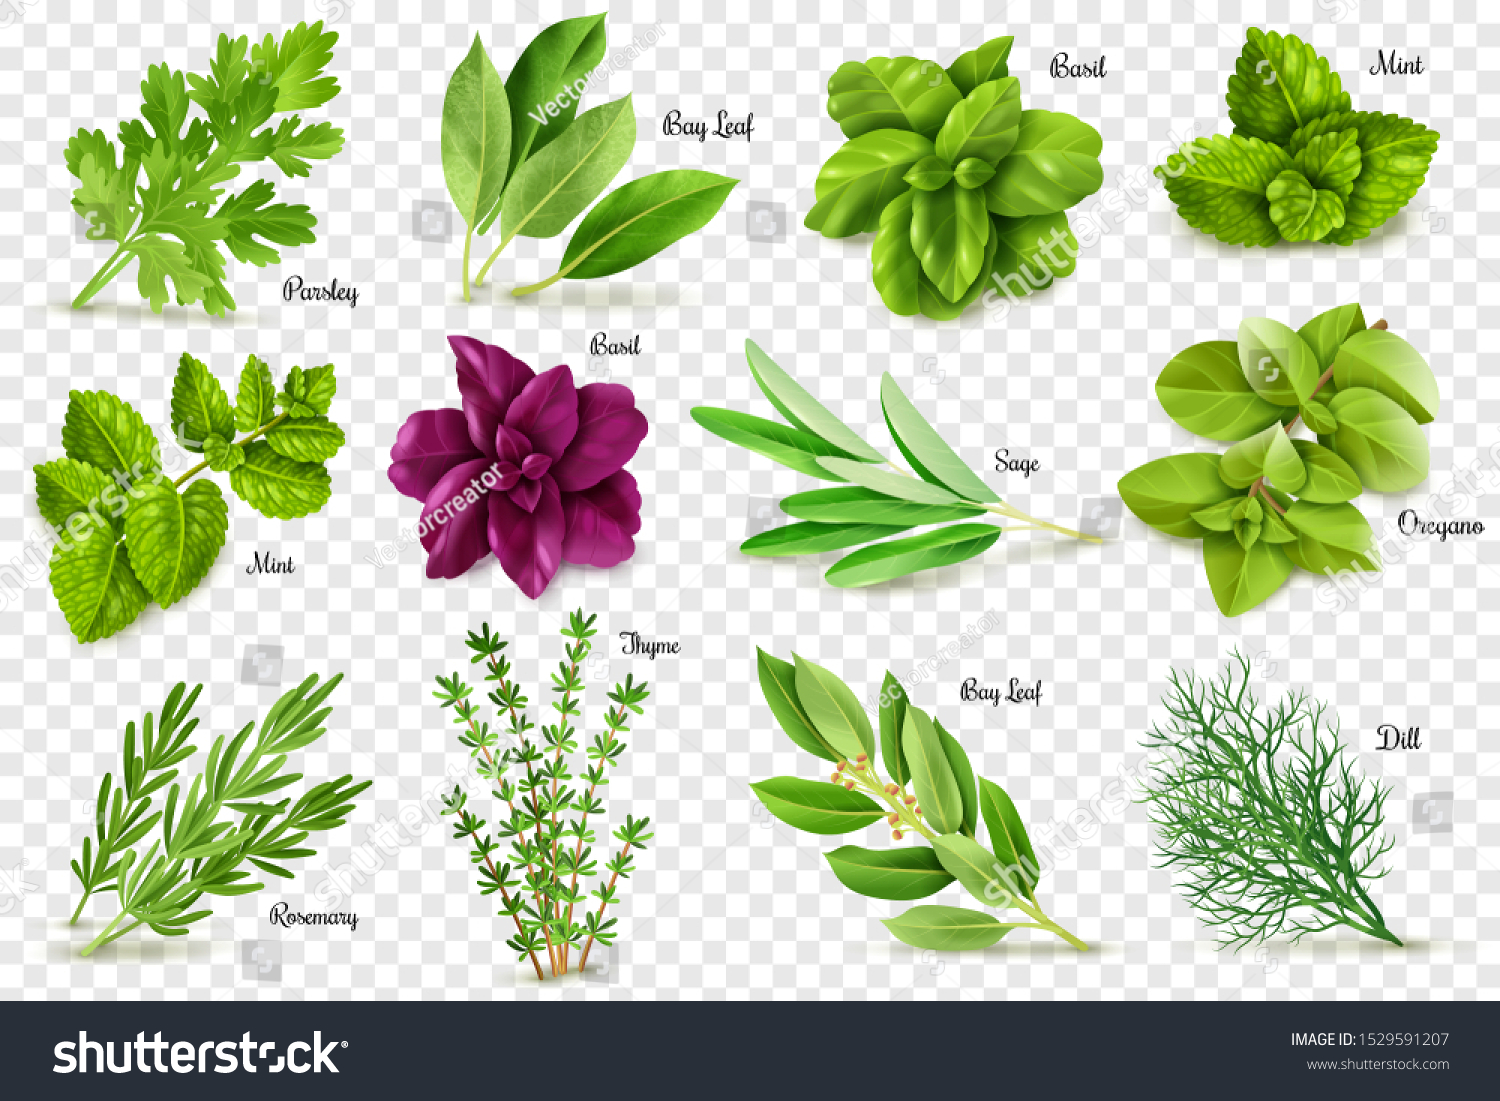 SVG of A large set of herbs on a transparent background, isolated objects, popular culinary plants, natural health care, mint and rosemary, basil, thyme, parsley, dill, bay leaf, oregano and sage svg